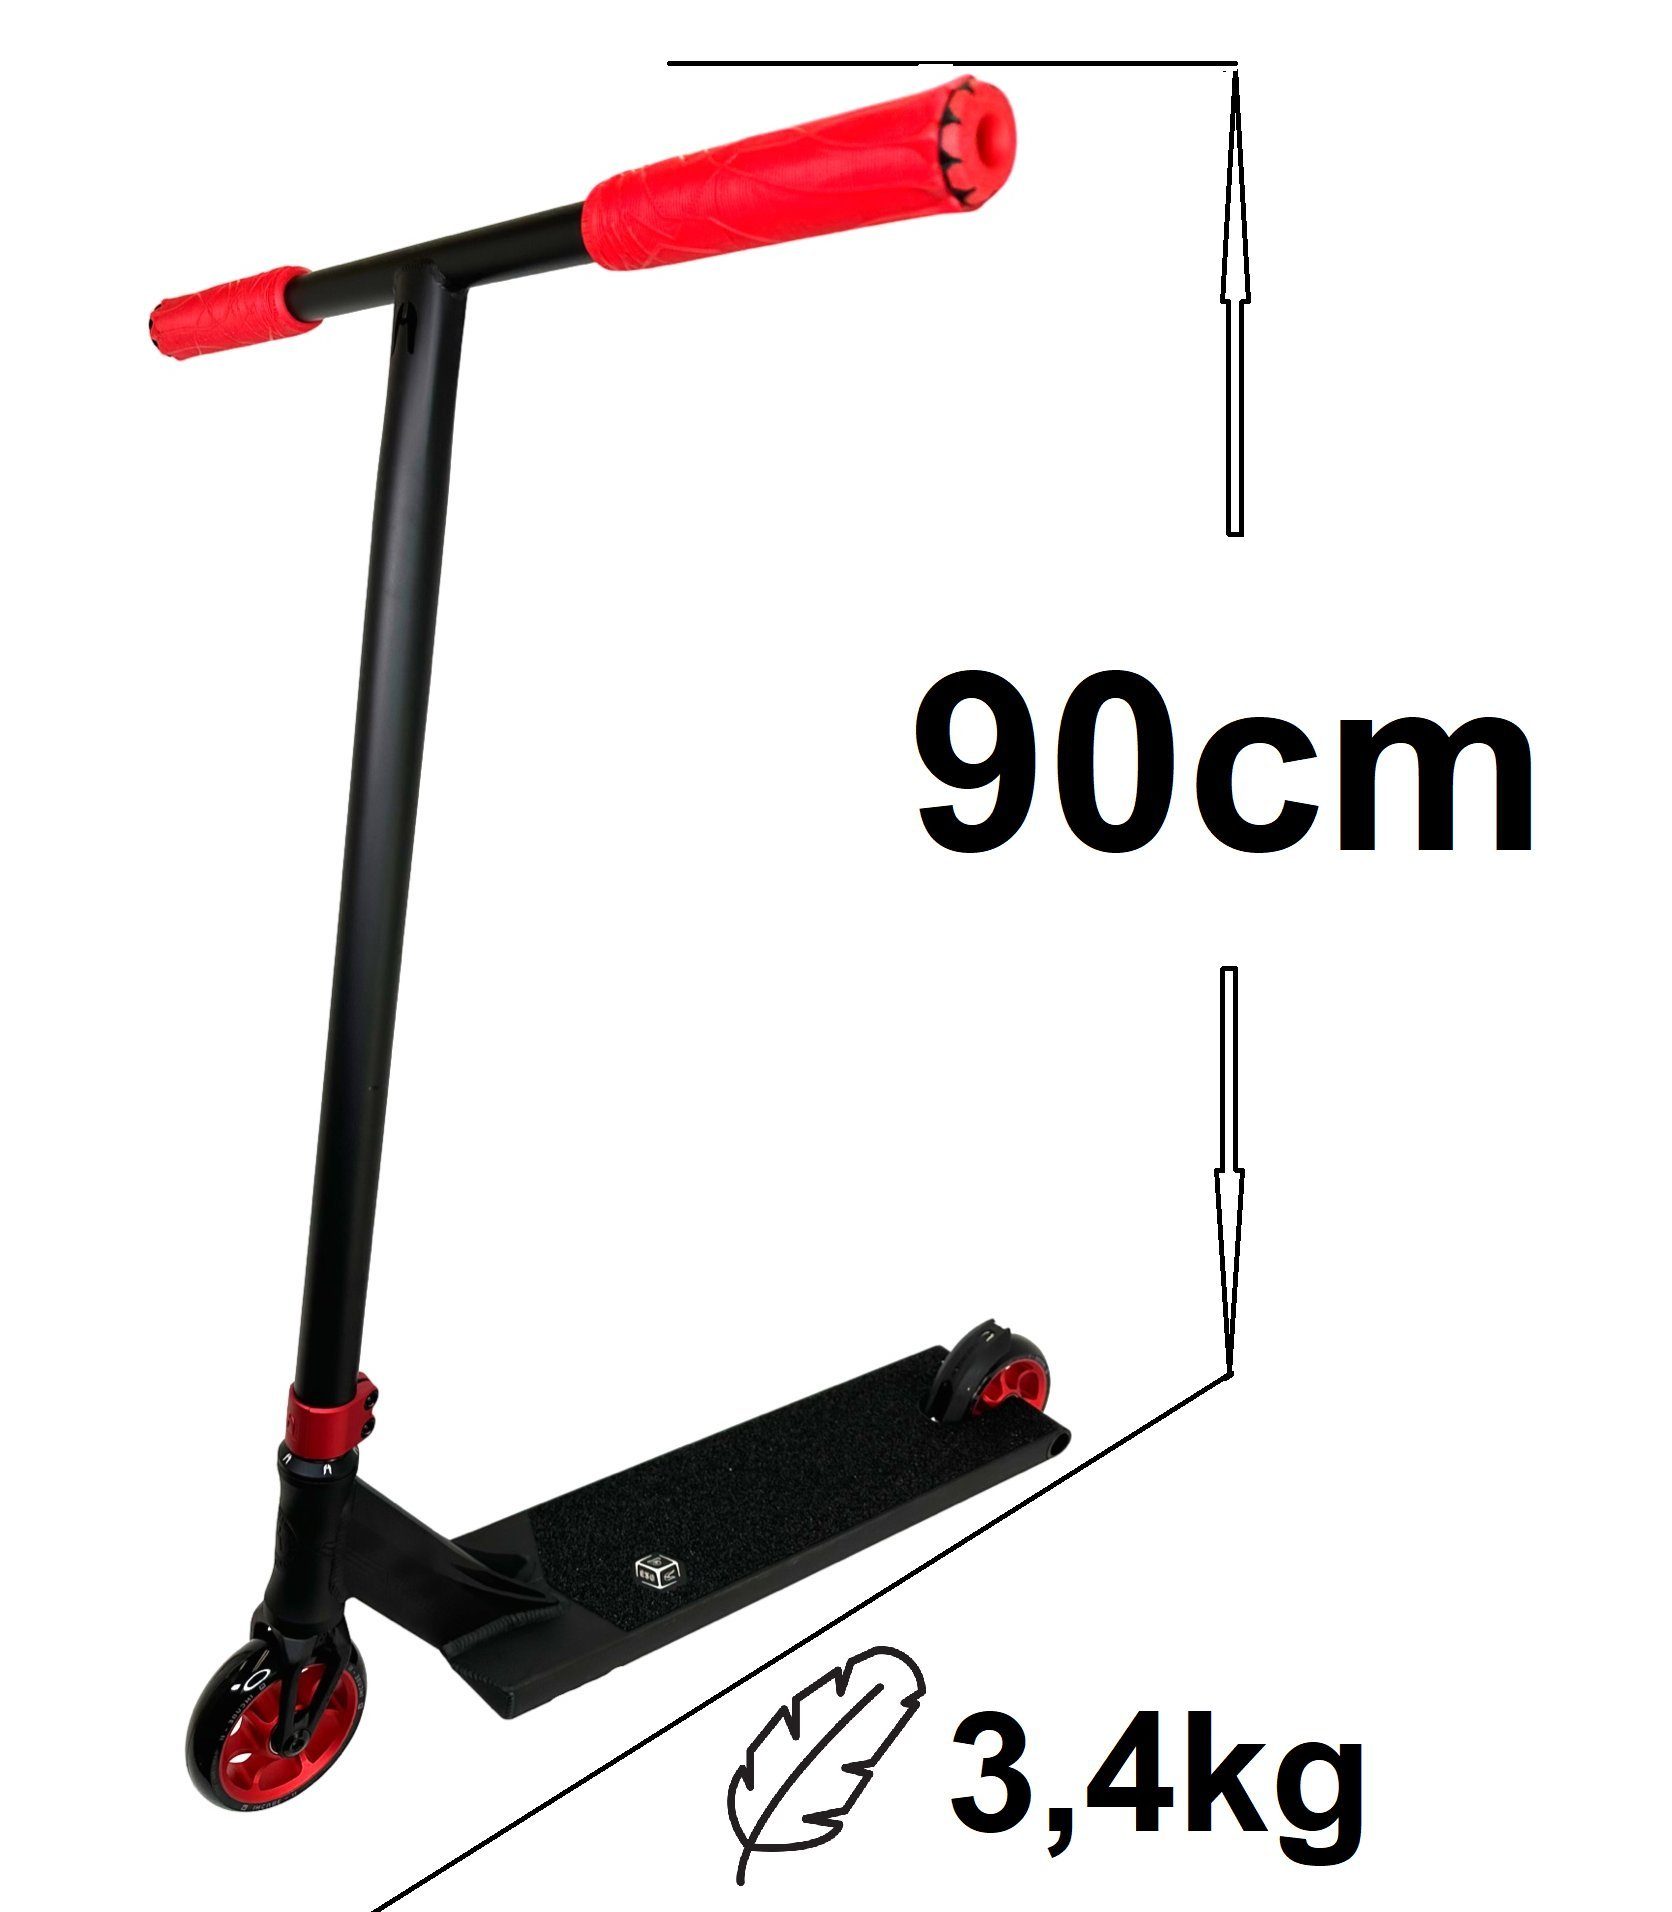 DTC Stunt-Scooter Ethic 3,4kg L DTC H=90cm Rot Pandora Stuntscooter Ethic